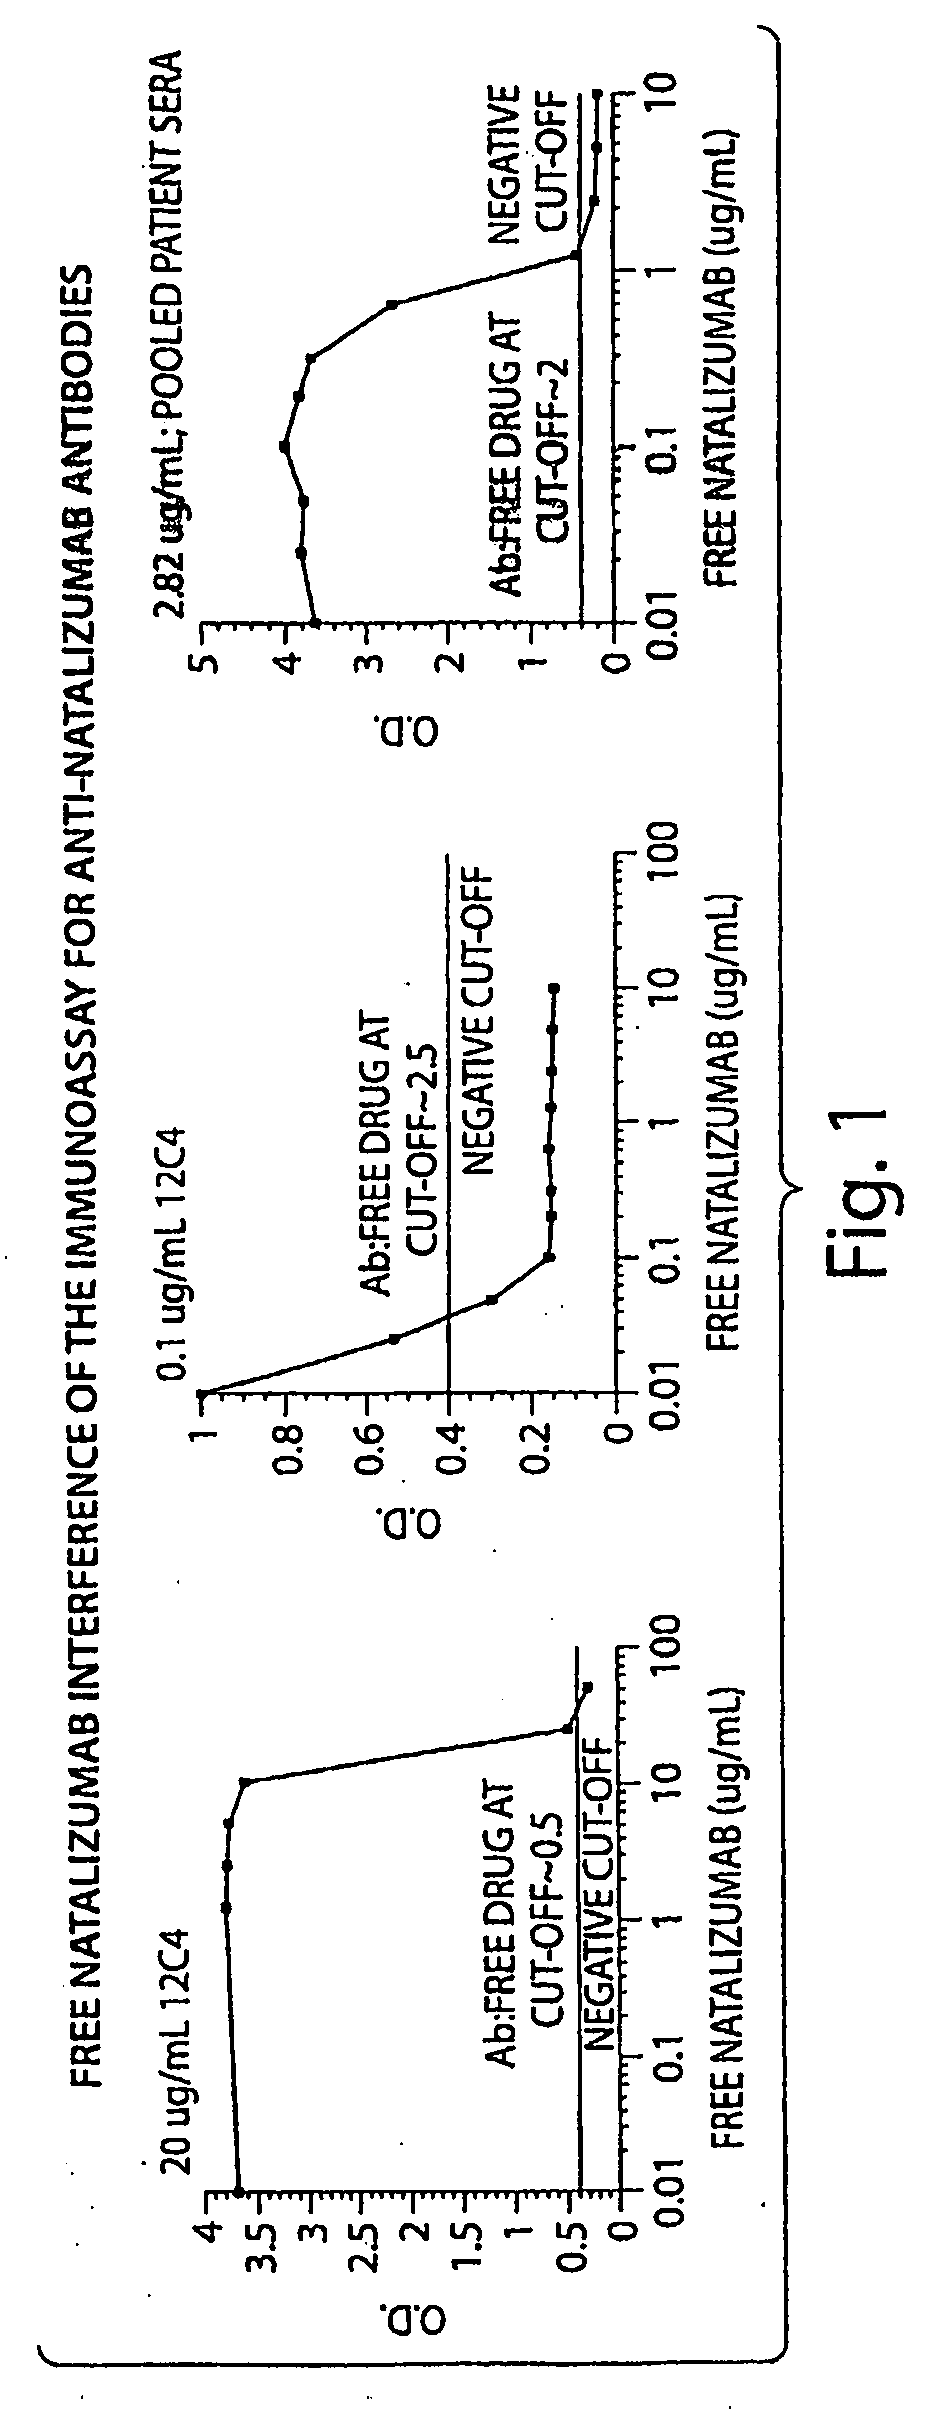 Methods and Products for Evaluating an Immune Response to a Therapeutic Protein